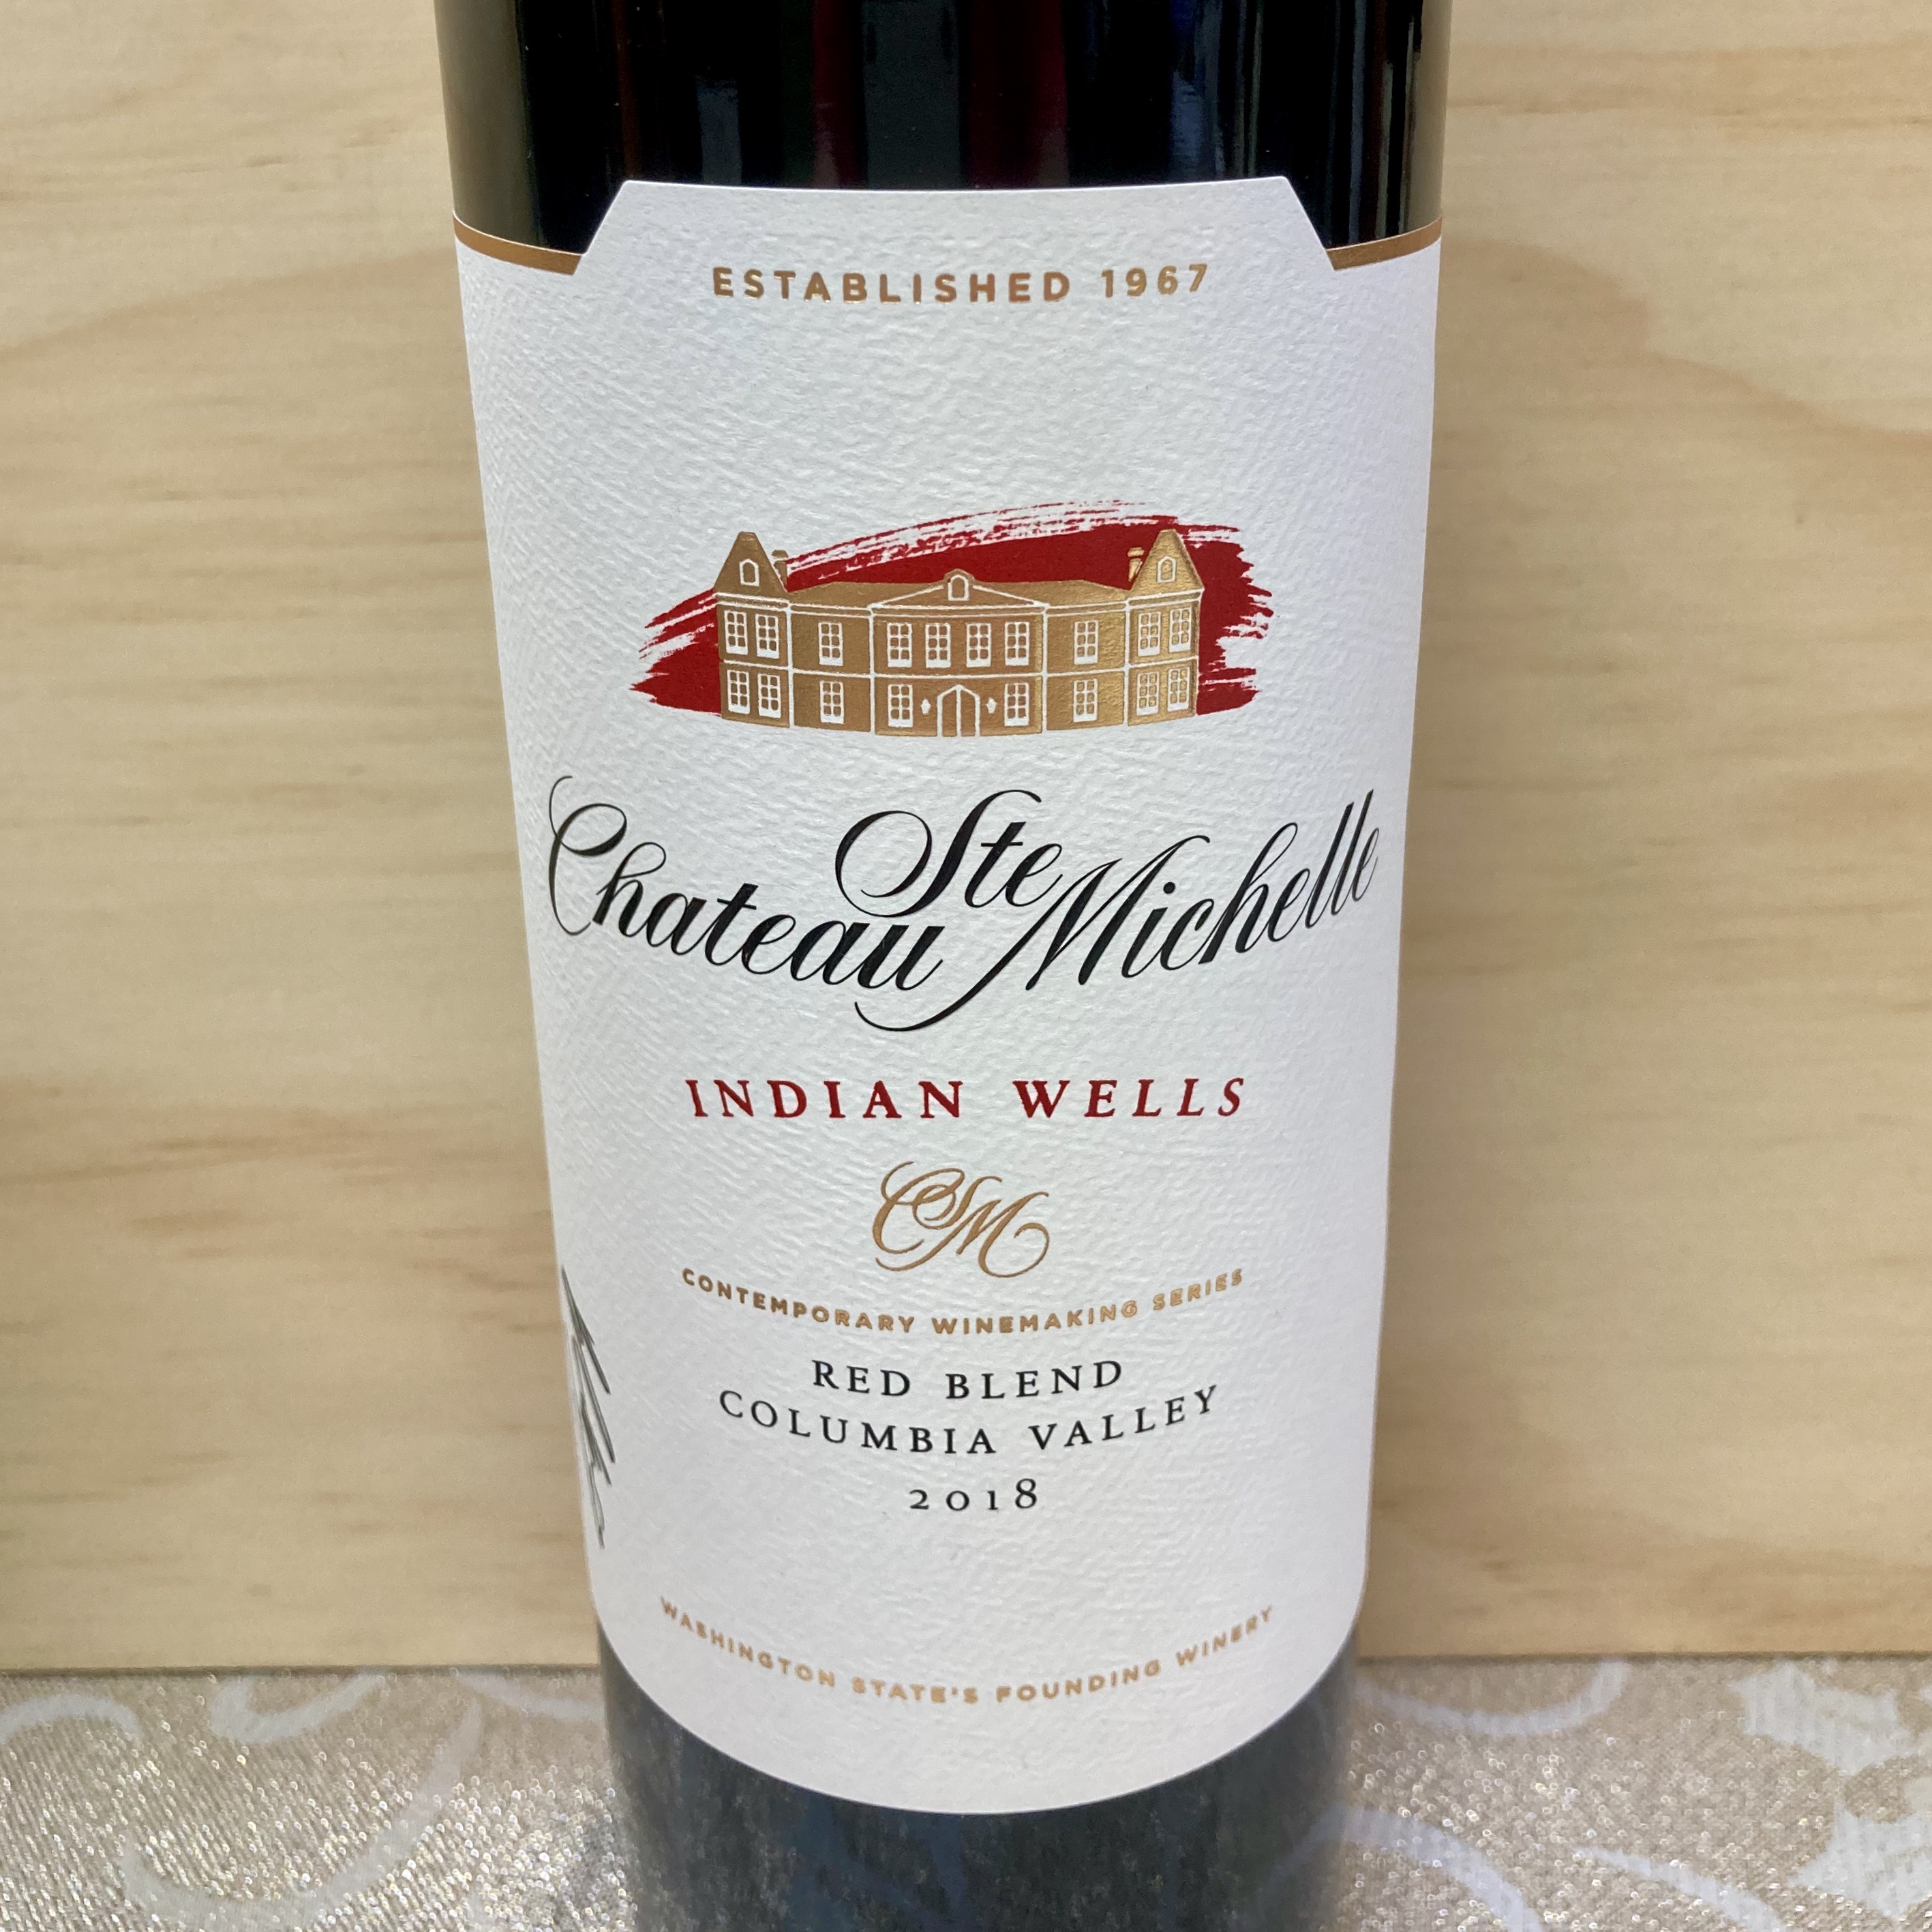 Chateau Ste.Michelle Indian Wells Red Blend Columbia Valley 2018